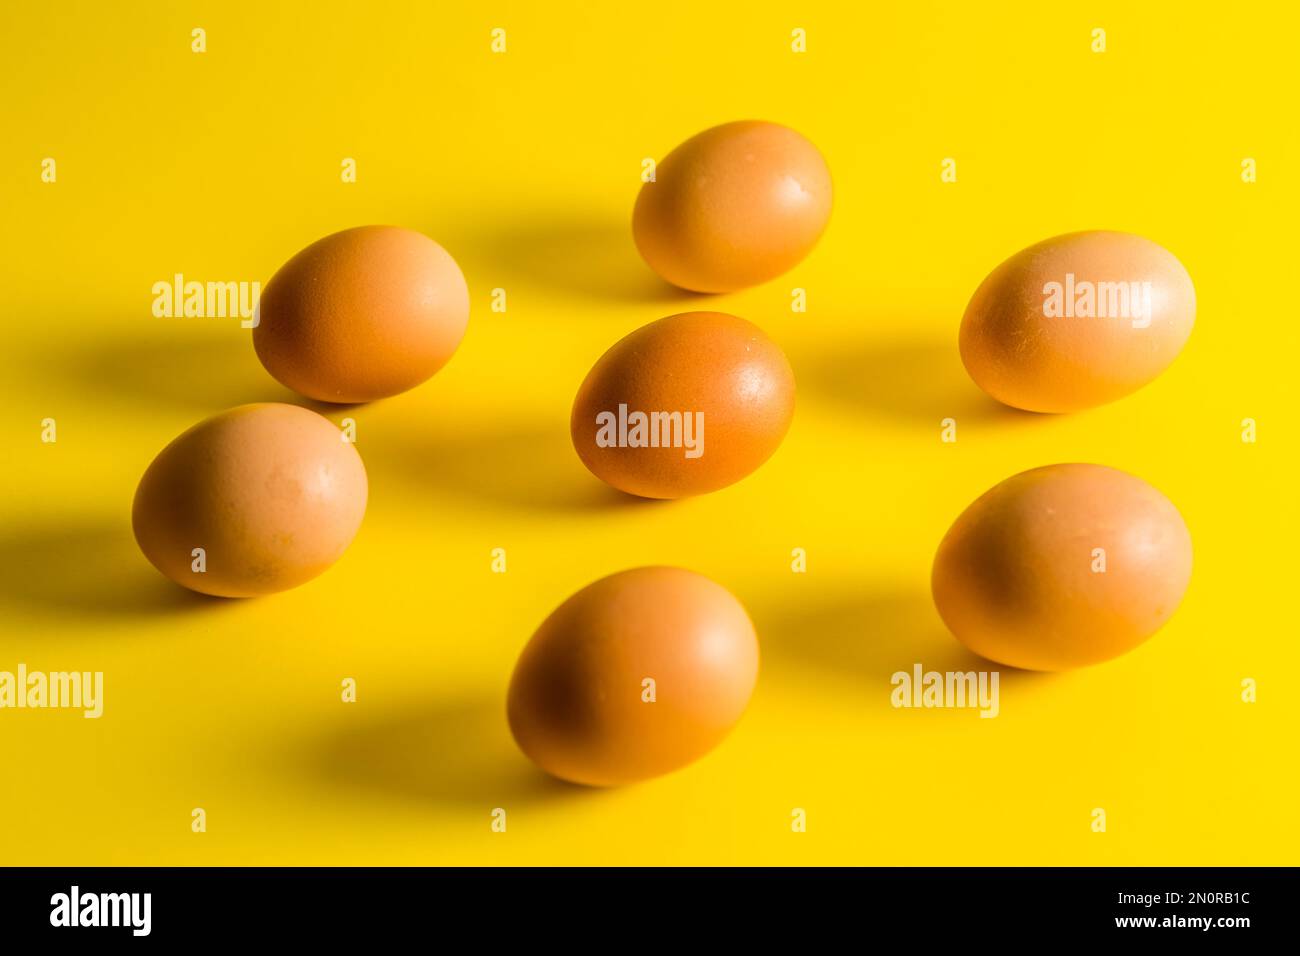 Eggs on a yellow background Stock Photo